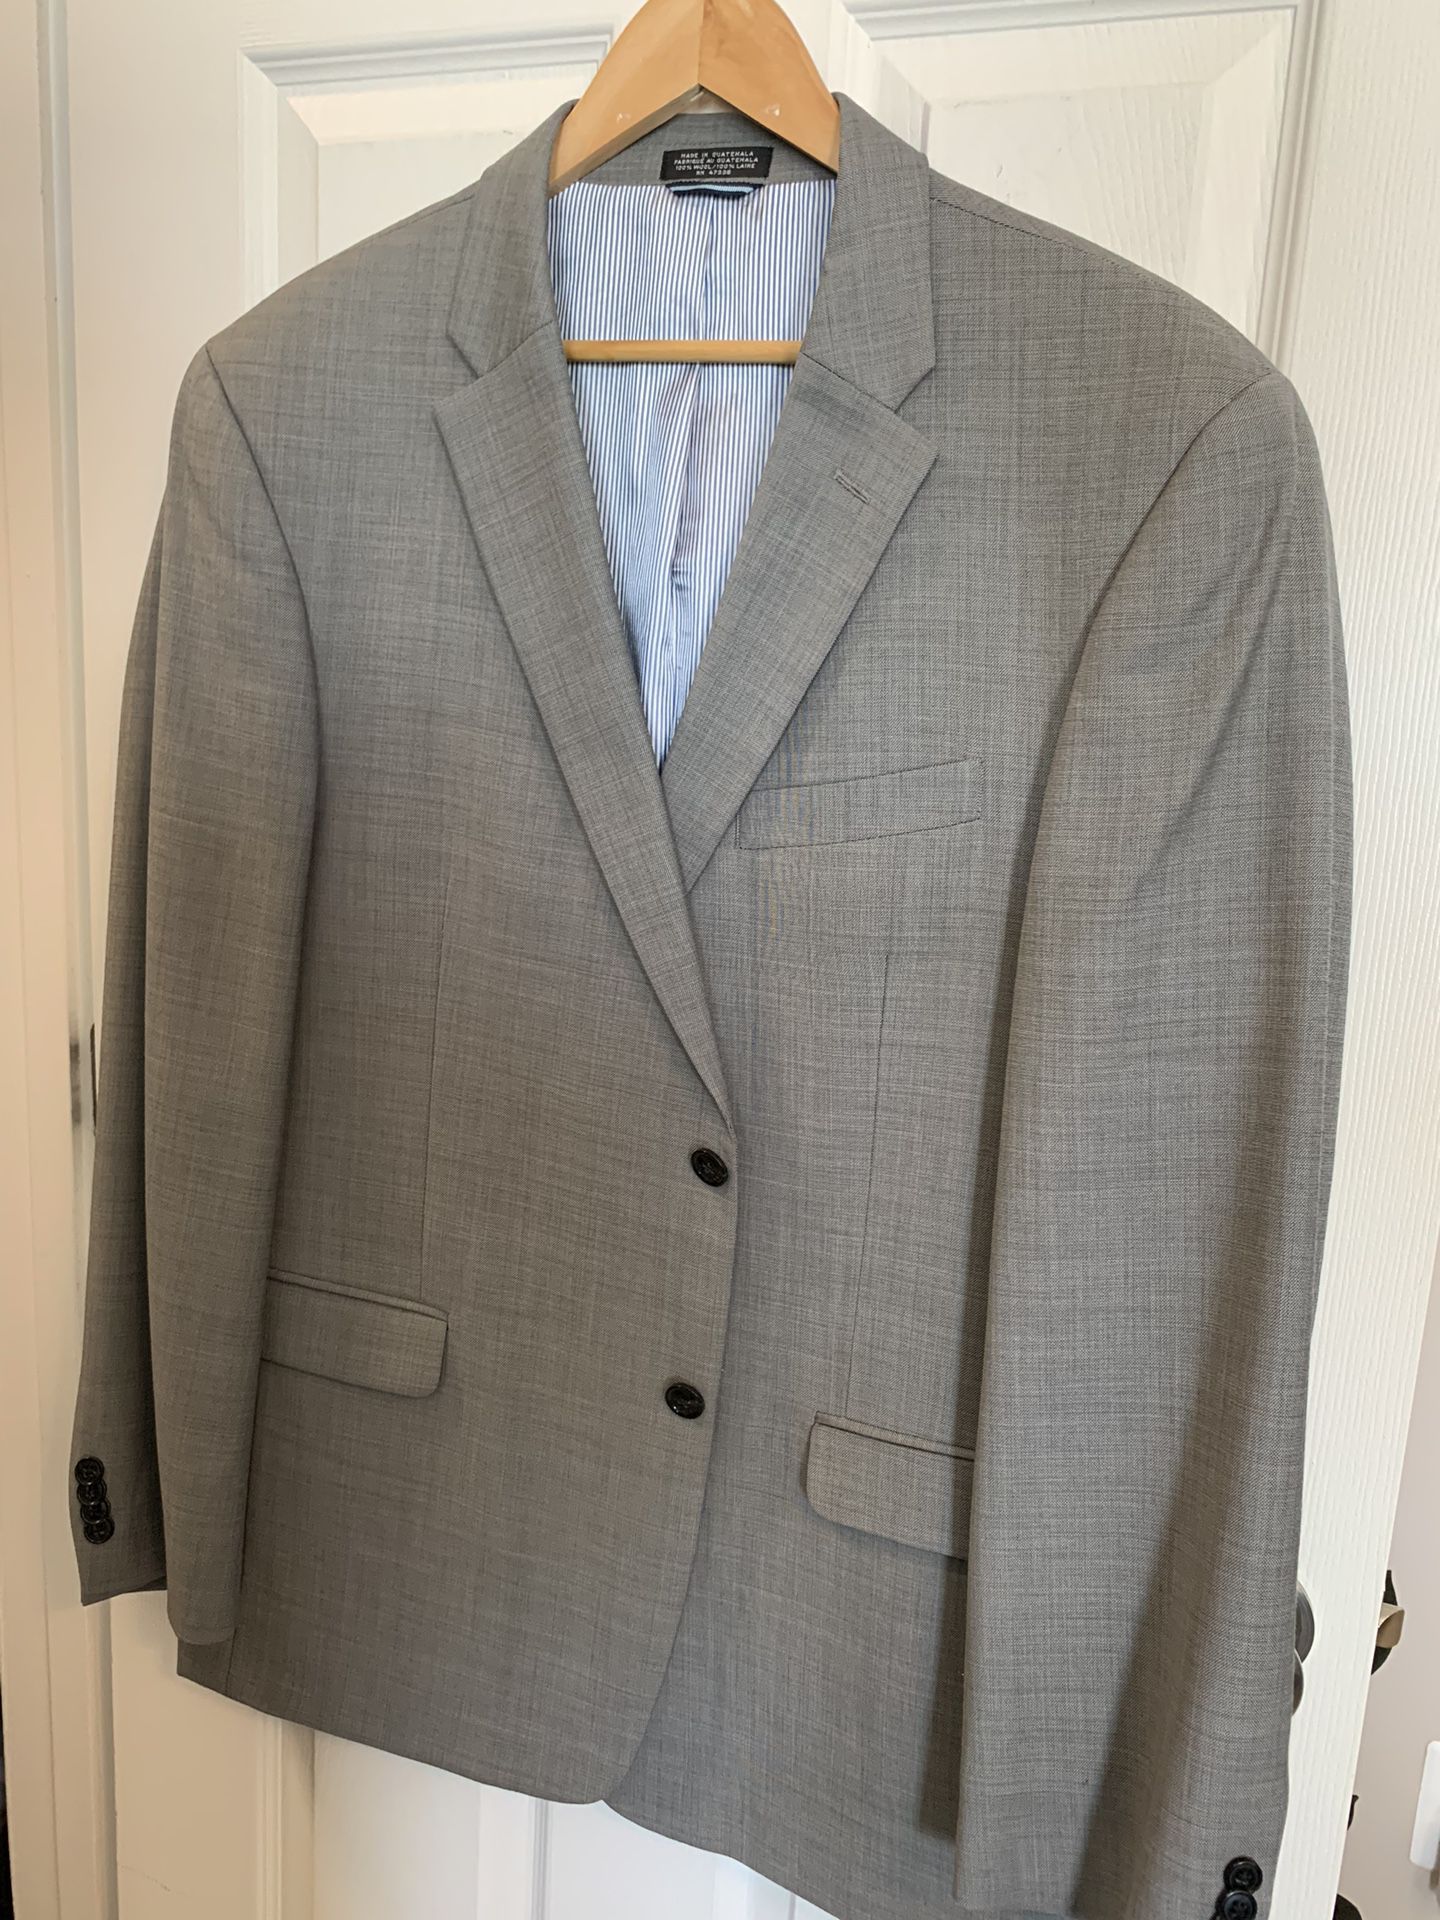 Men’s Sports Jacket and 2 Suits